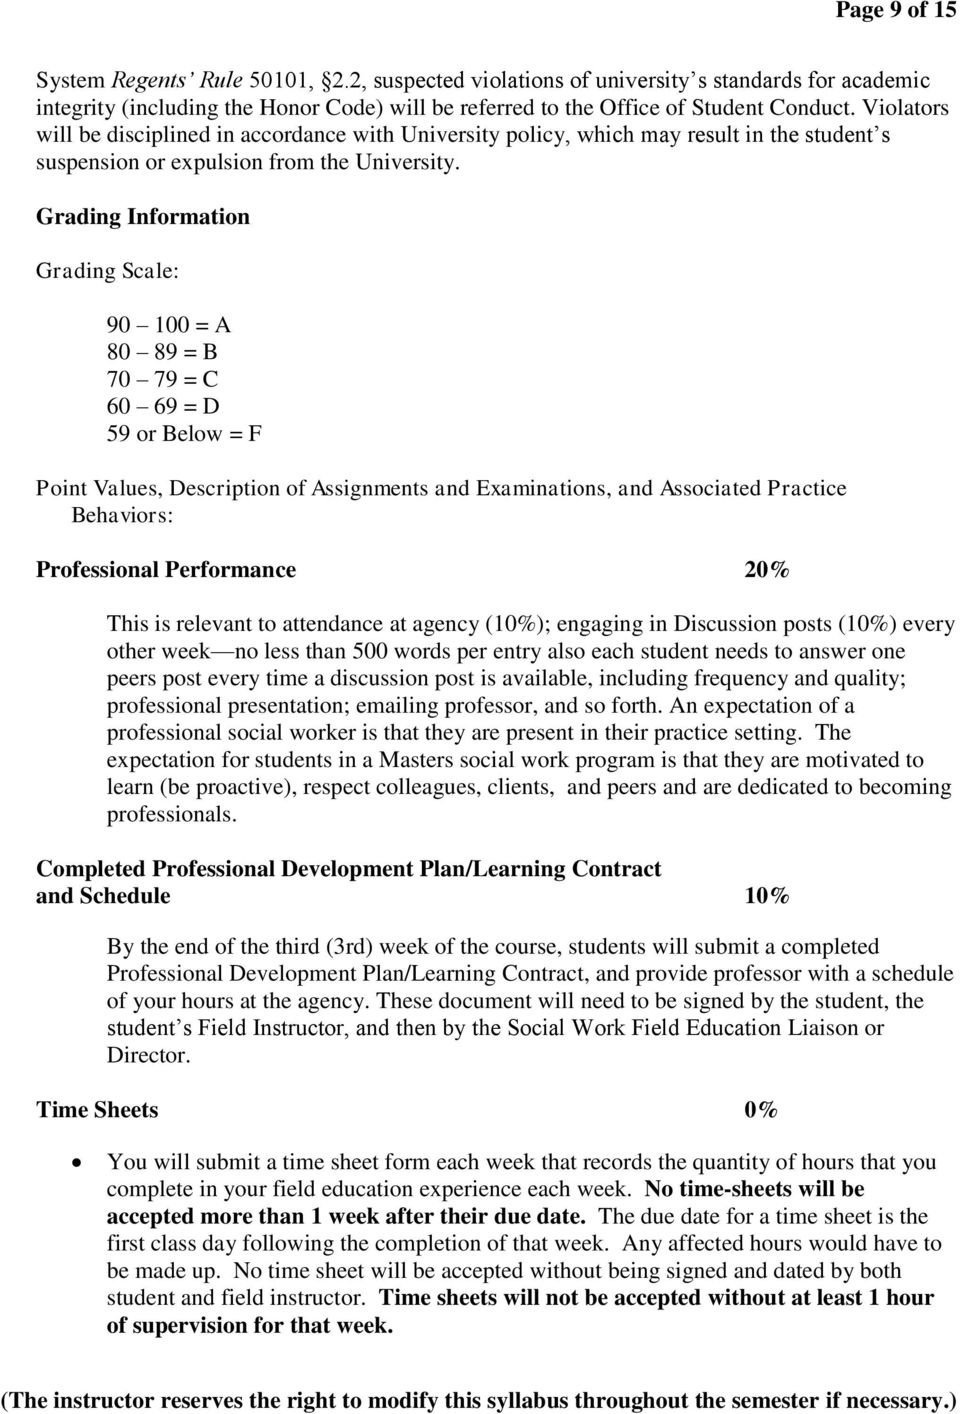 Grading Information Grading Scale: 90 100 = A 80 89 = B 70 79 = C 60 69 = D 59 or Below = F Point Values, Description of Assignments and Examinations, and Associated Practice Behaviors: Professional